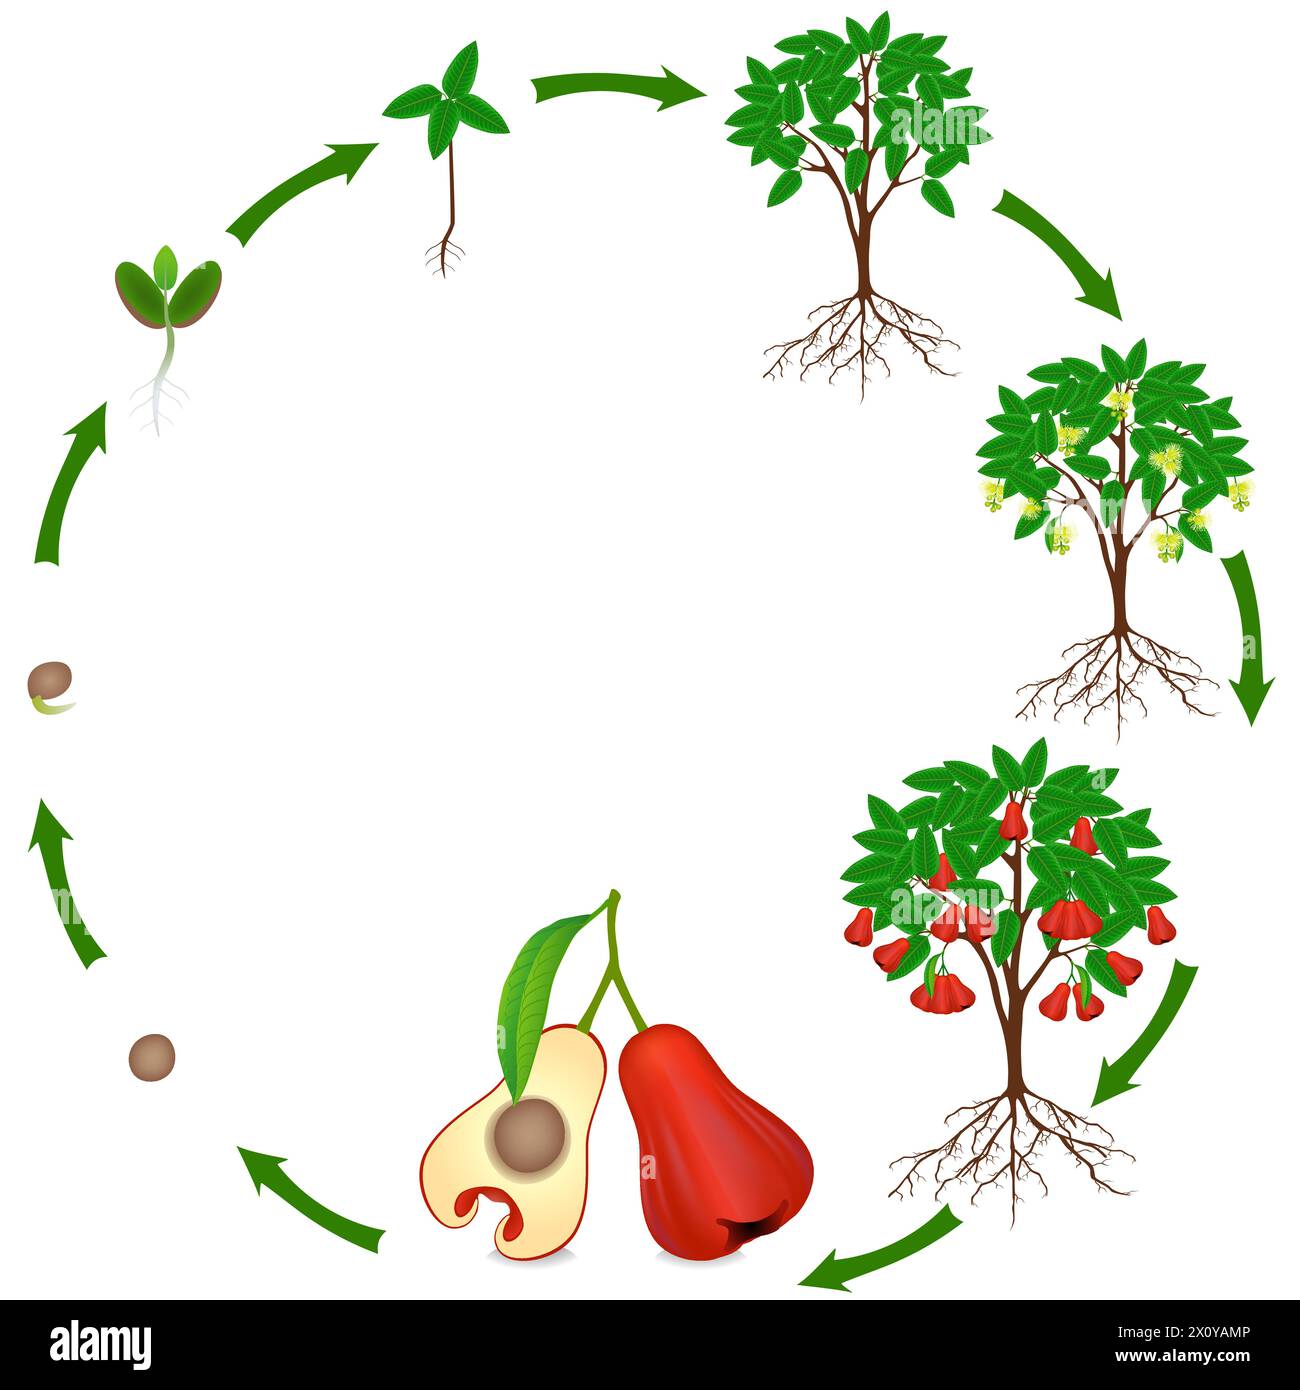 Life cycle of rose apple plant on a white background. Stock Vector